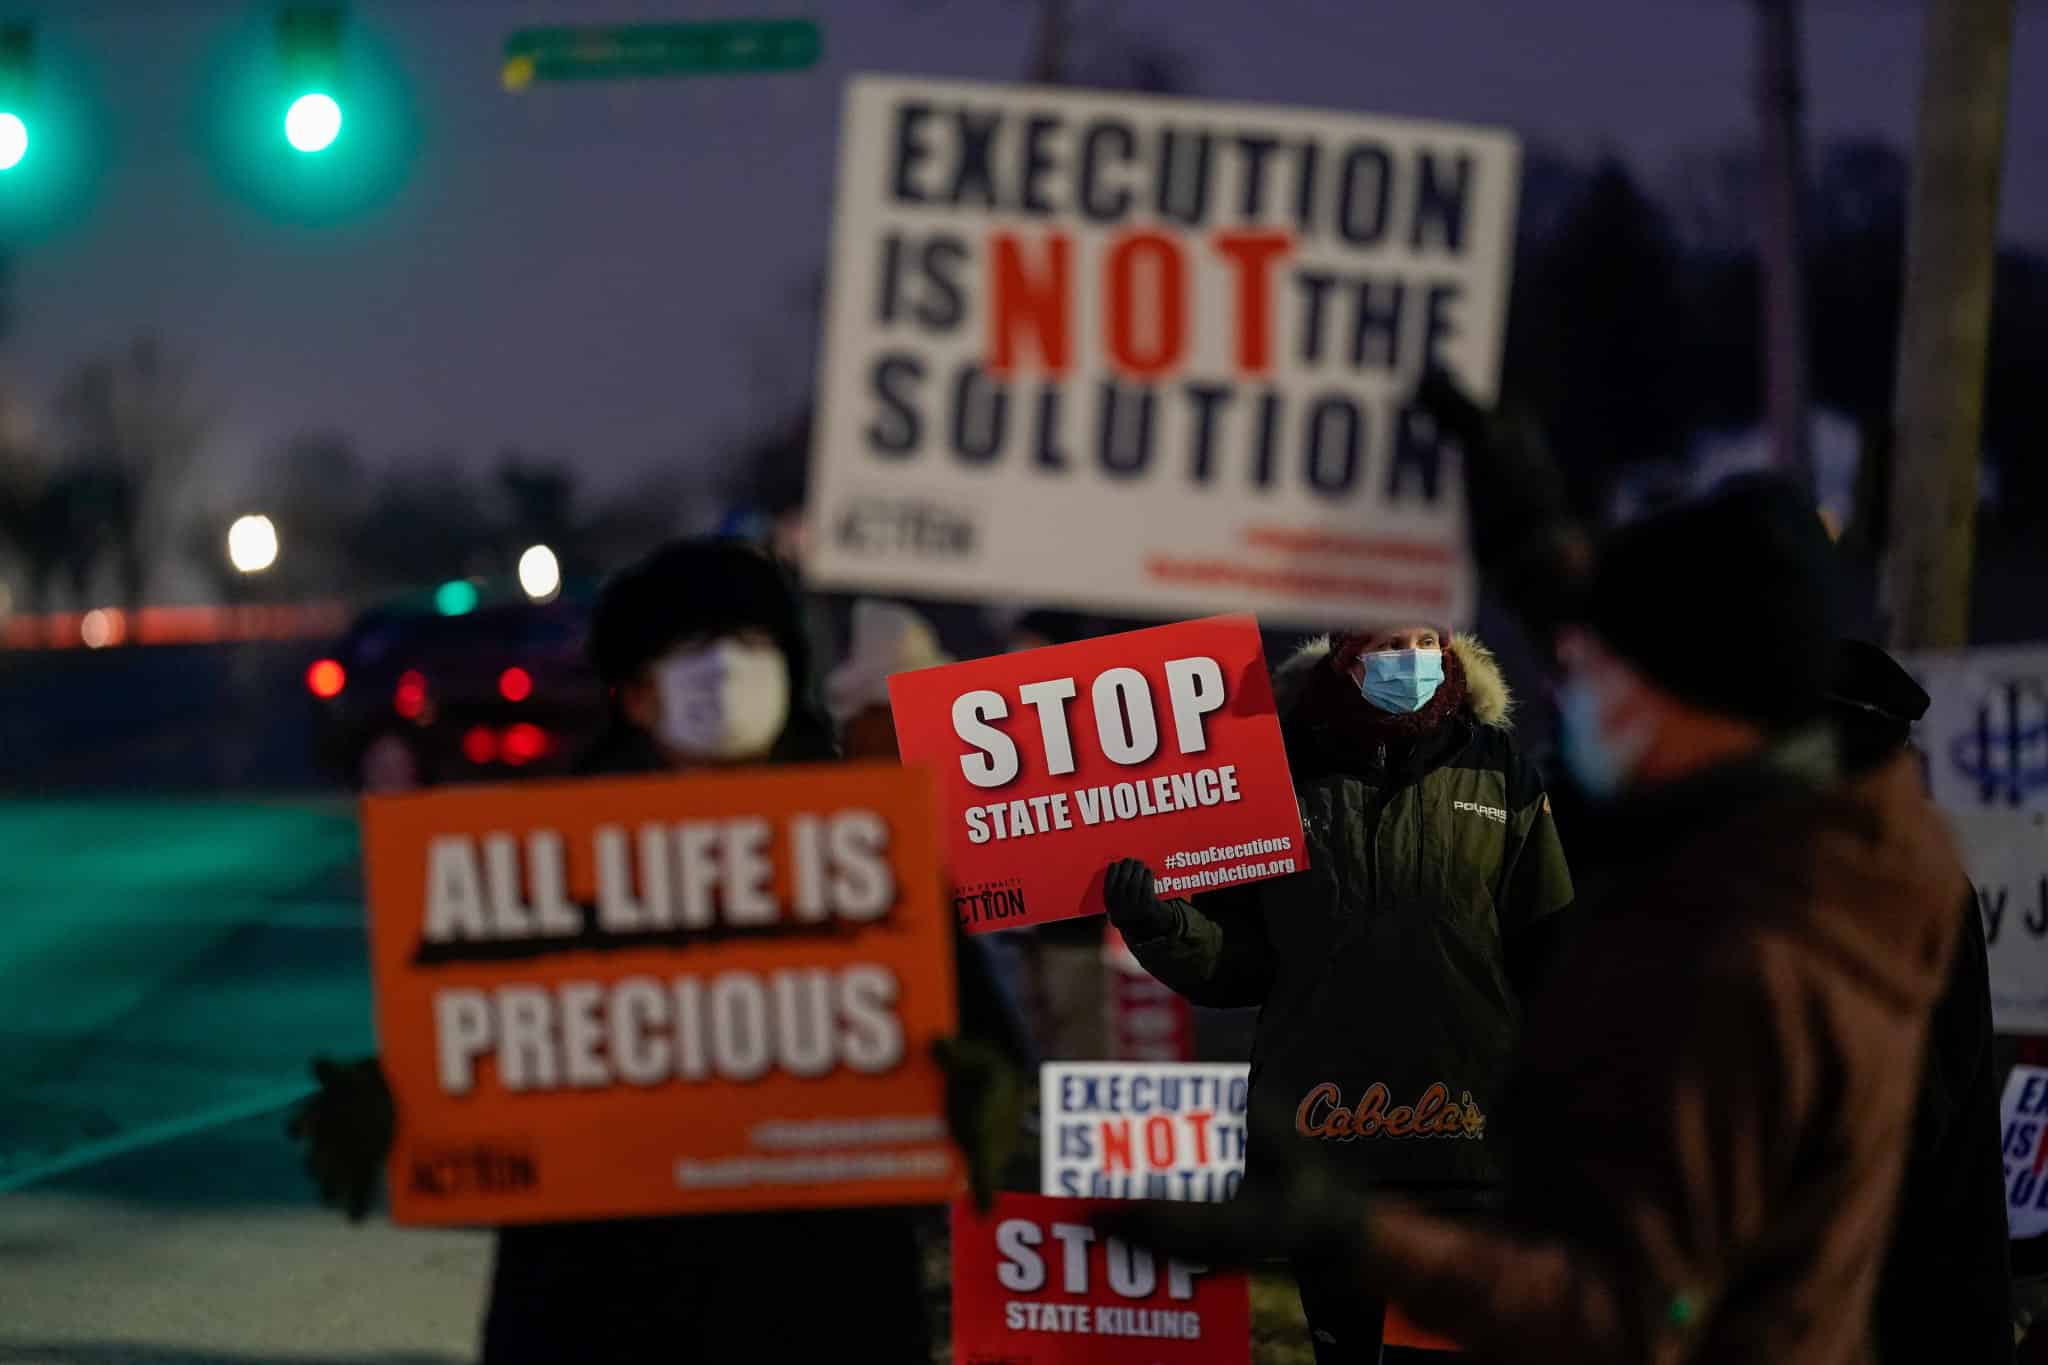 How the restart of federal executions led to calls to abolish the death penalty